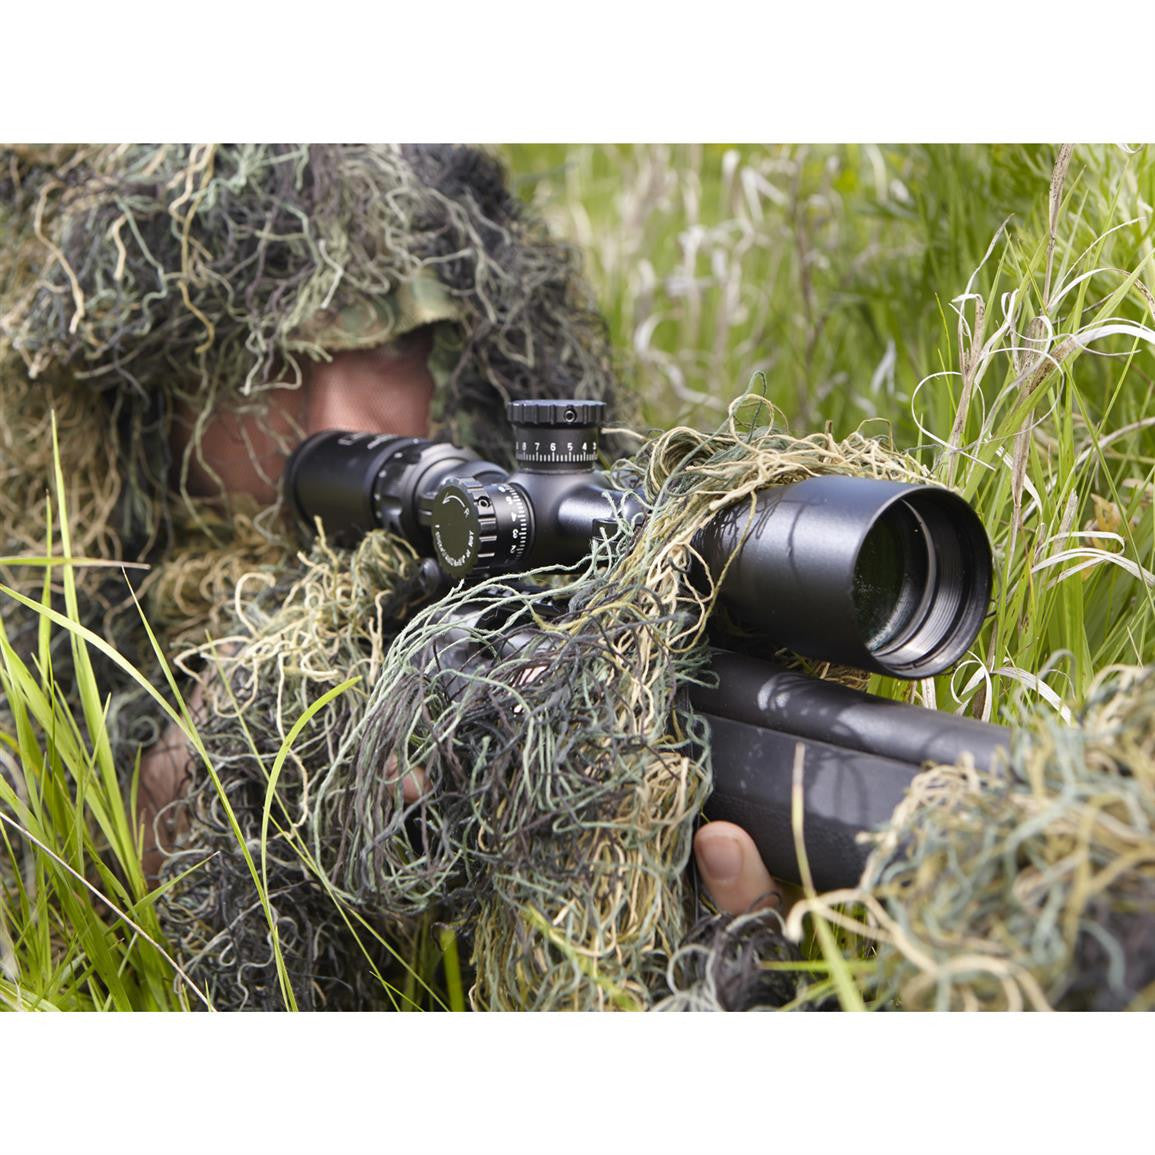 SPG416X44MD ghillie suit sniper